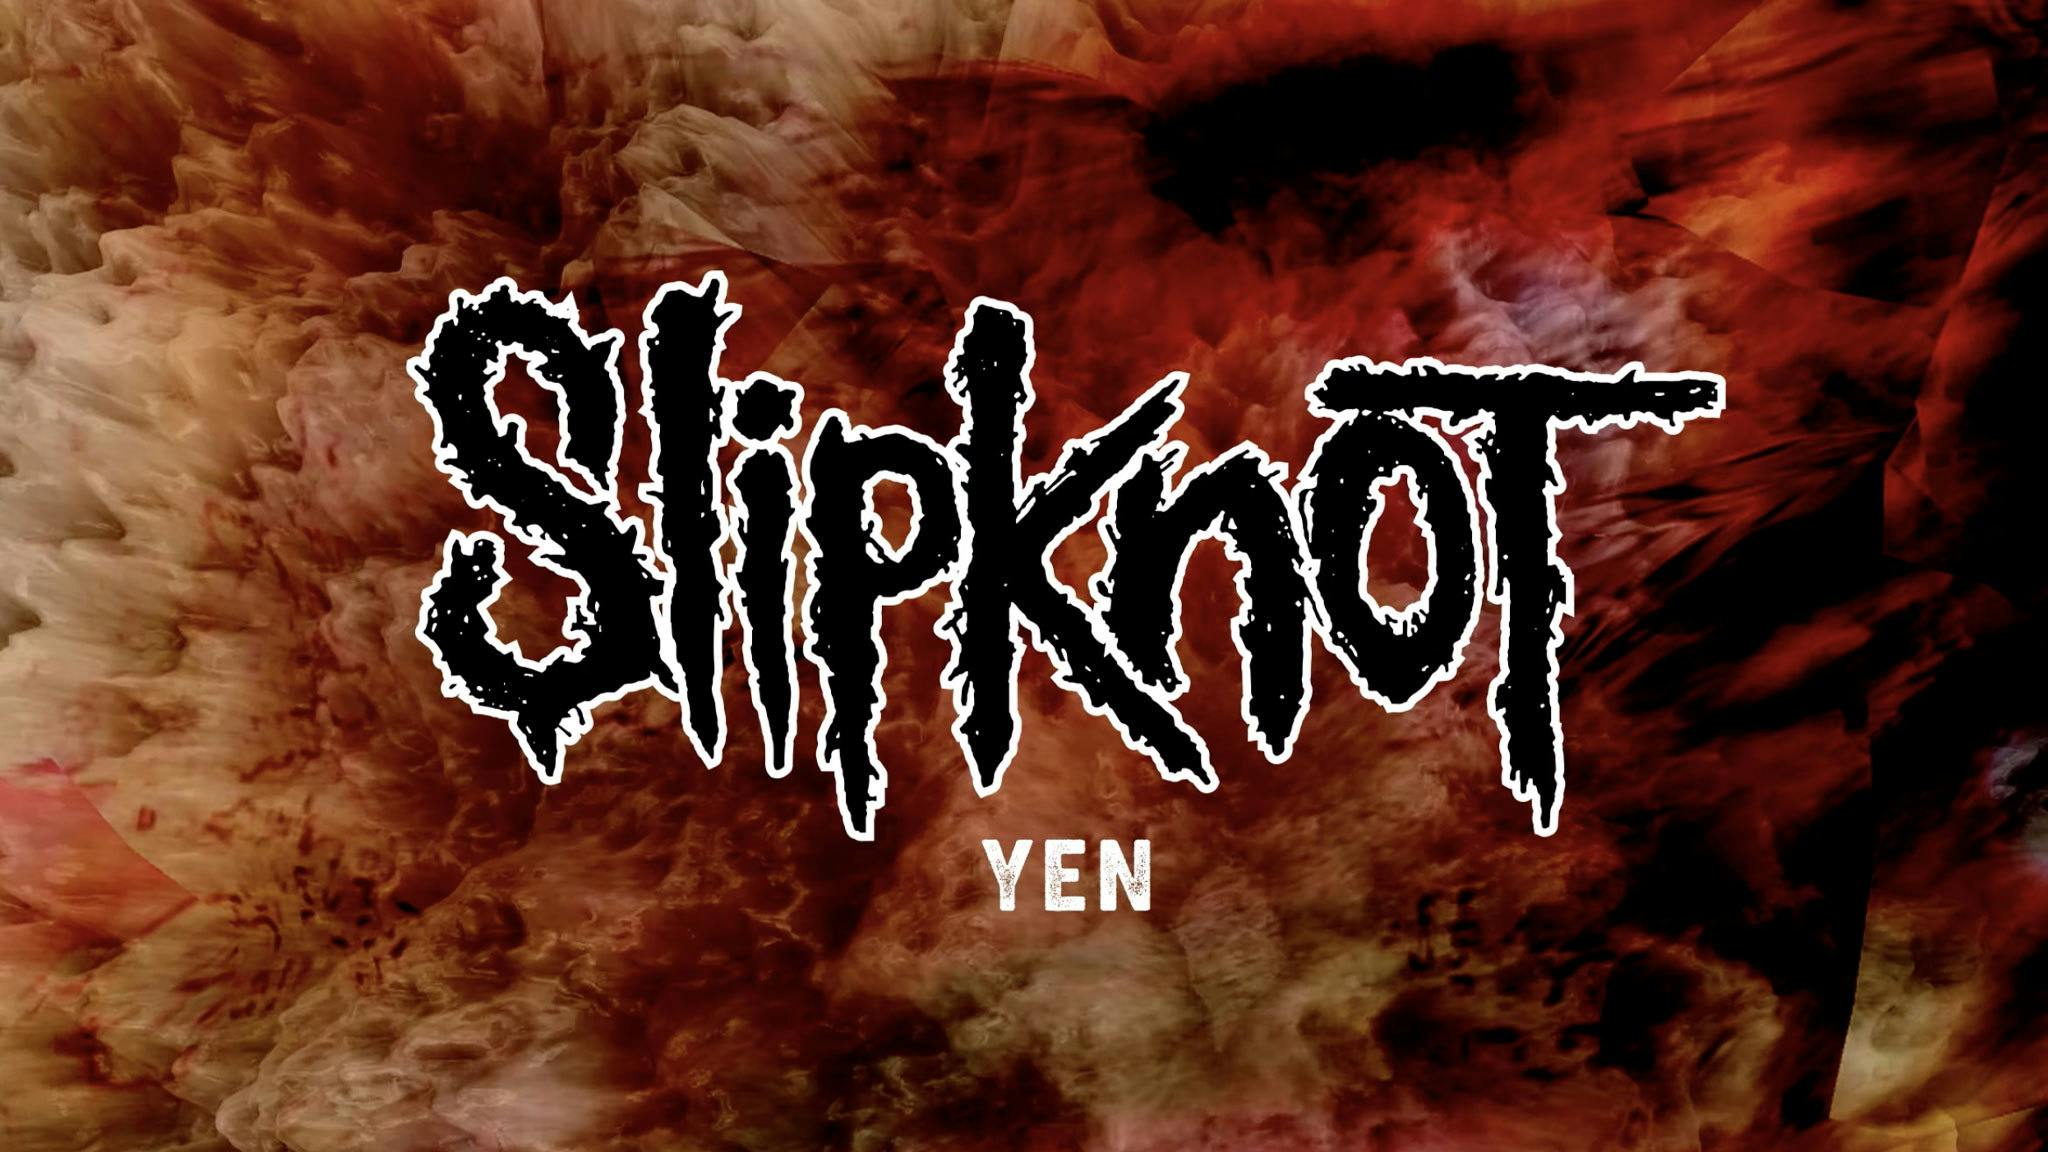 Slipknot release new song Yen: “It’s such a great, cool departure for us”